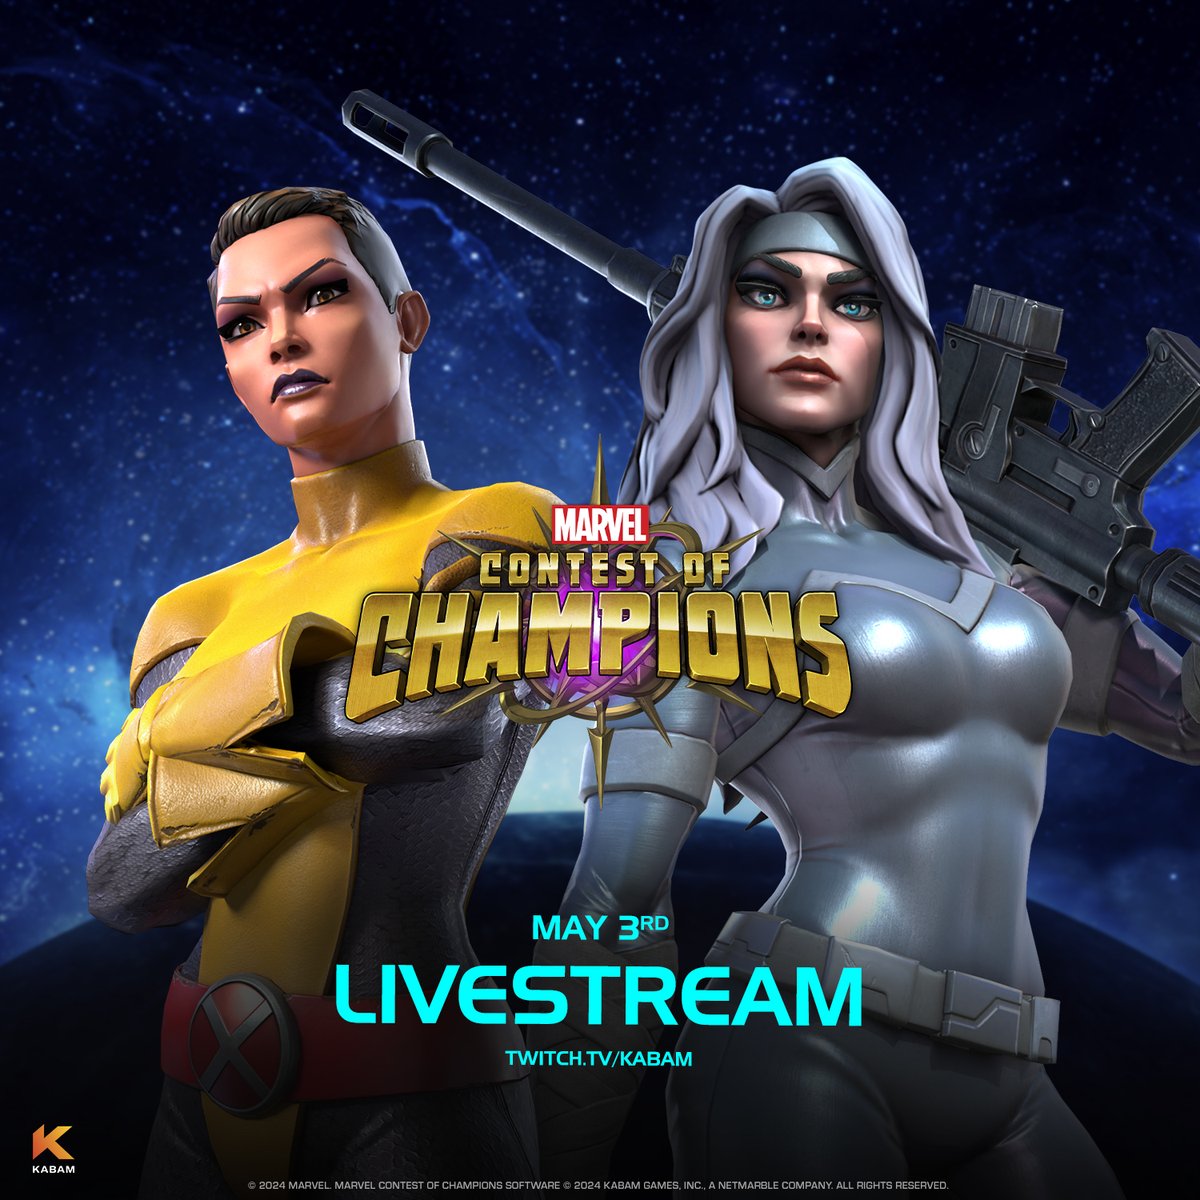 We're live NOW(ish)! Join Miike and Jax as they showcase a lot to look forward to in the Battlerealm! Join us for your chance to win a shiny new 7-Star! twitch.tv/kabam